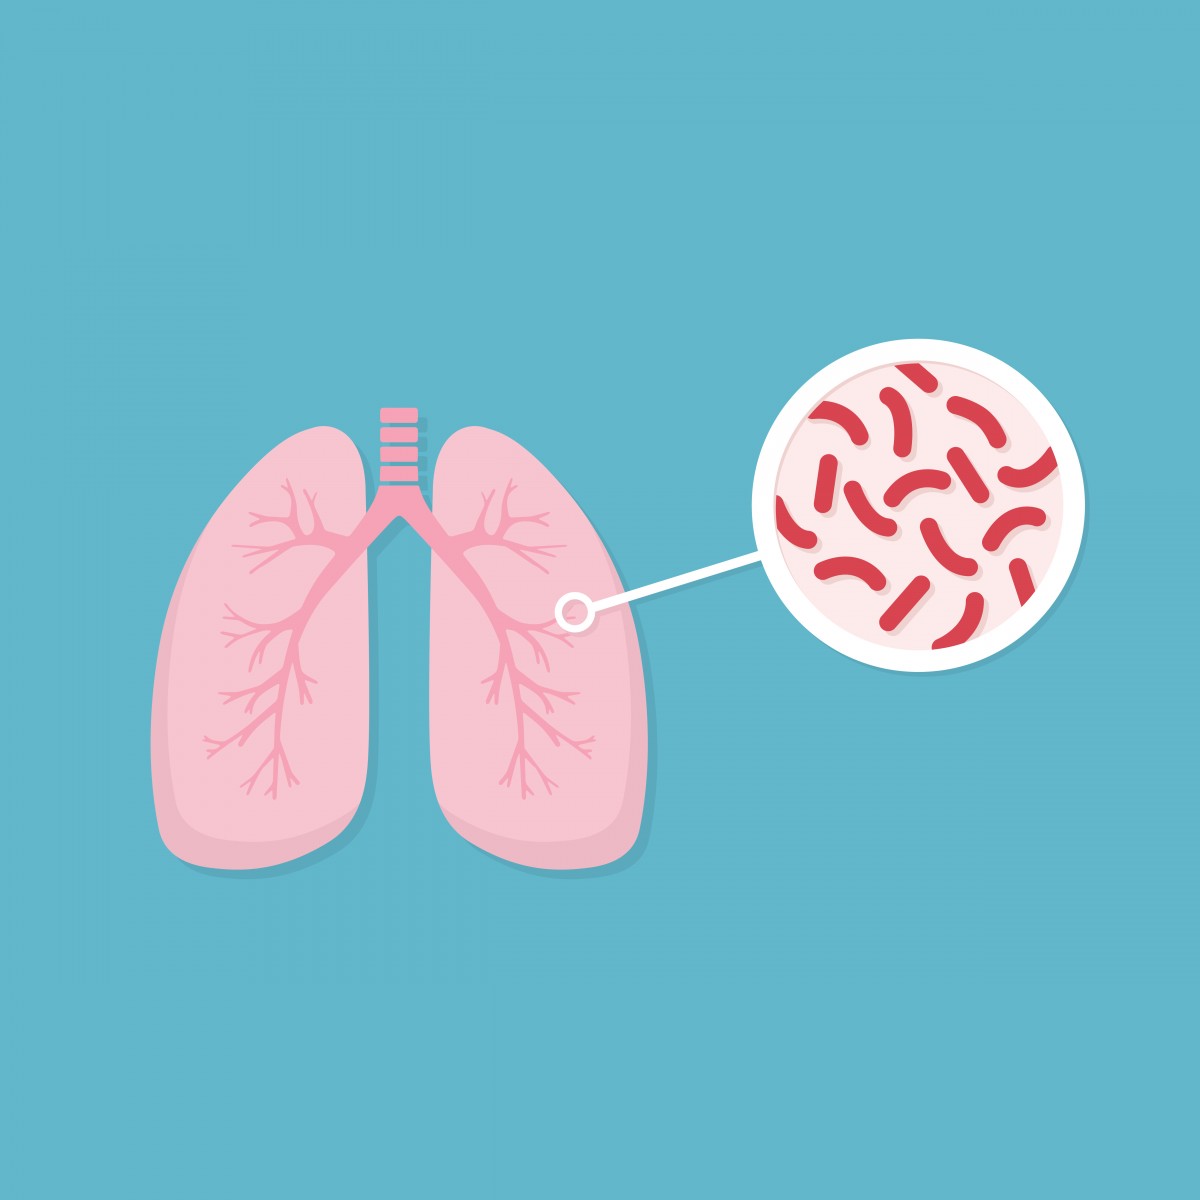 Tuberculosis: the tug with COVID-19